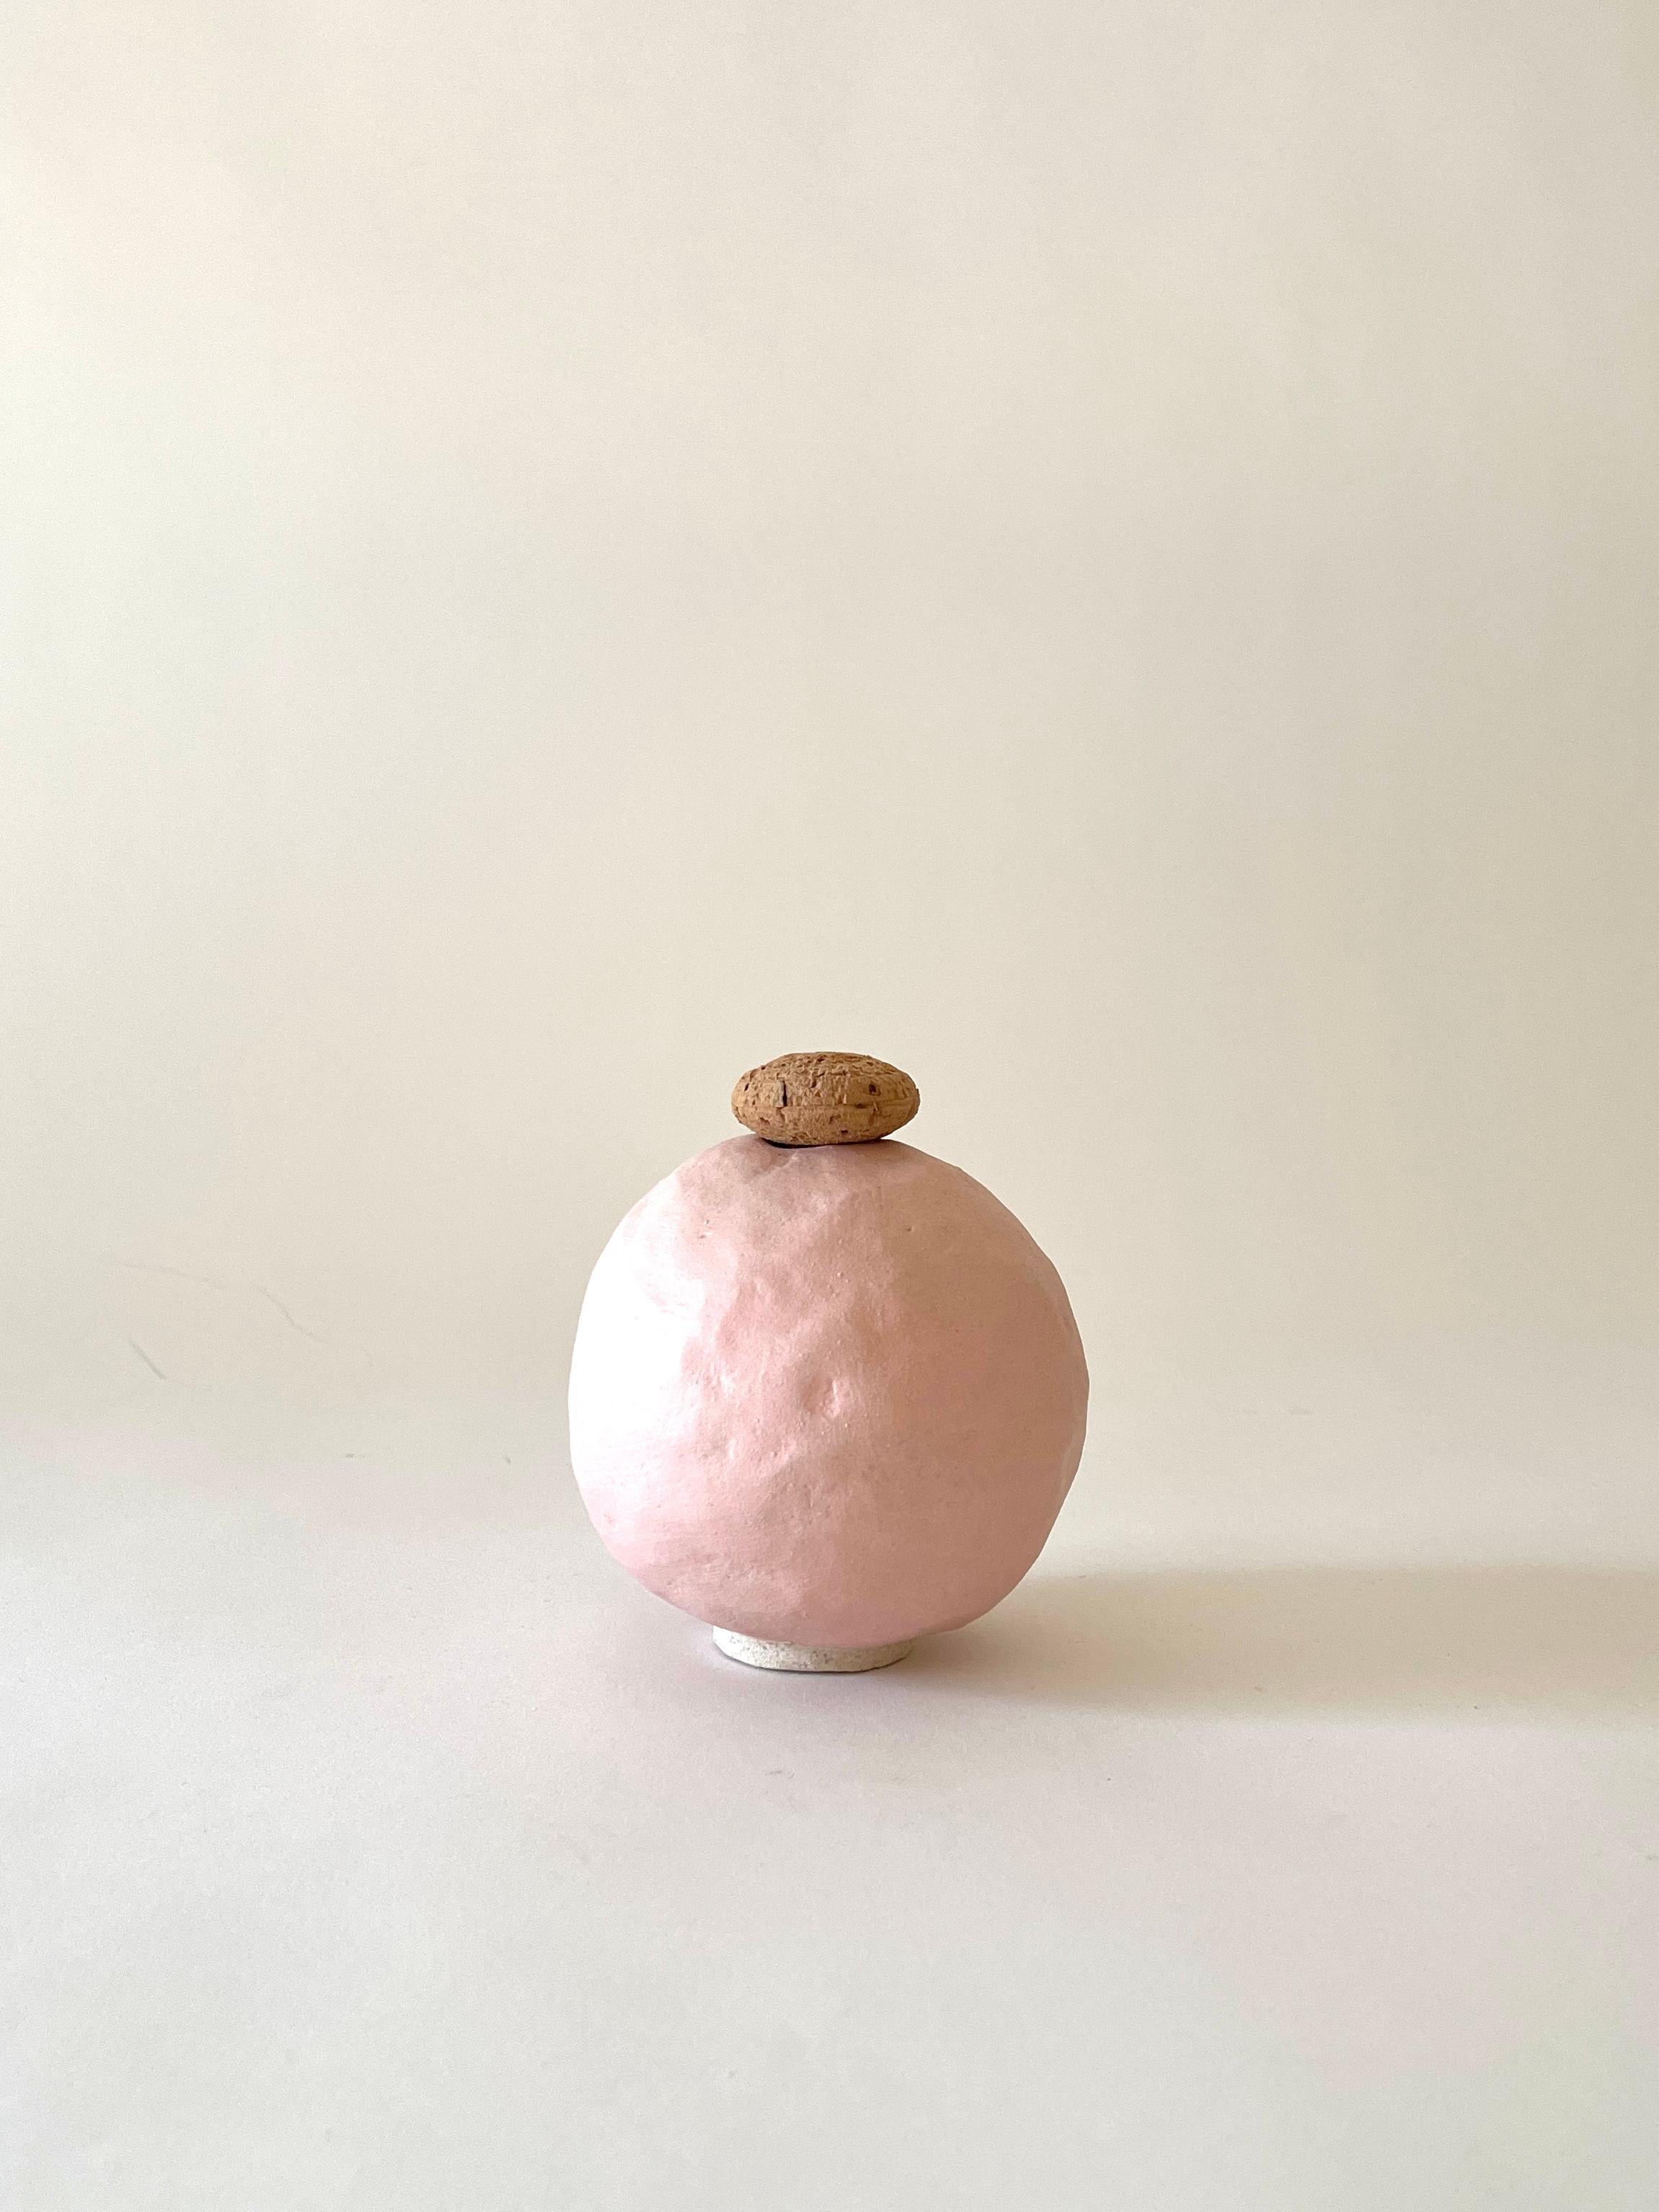 Edwina pink vase by Meg Morrison
One of a kind.
Materials: Ceramic, cork.
Dimensions: Ø 10 x H 13 cm.

All sizes are approximate. Although vases are watertight condensation may form on the bottom. Please protect delicate surfaces.

Meg